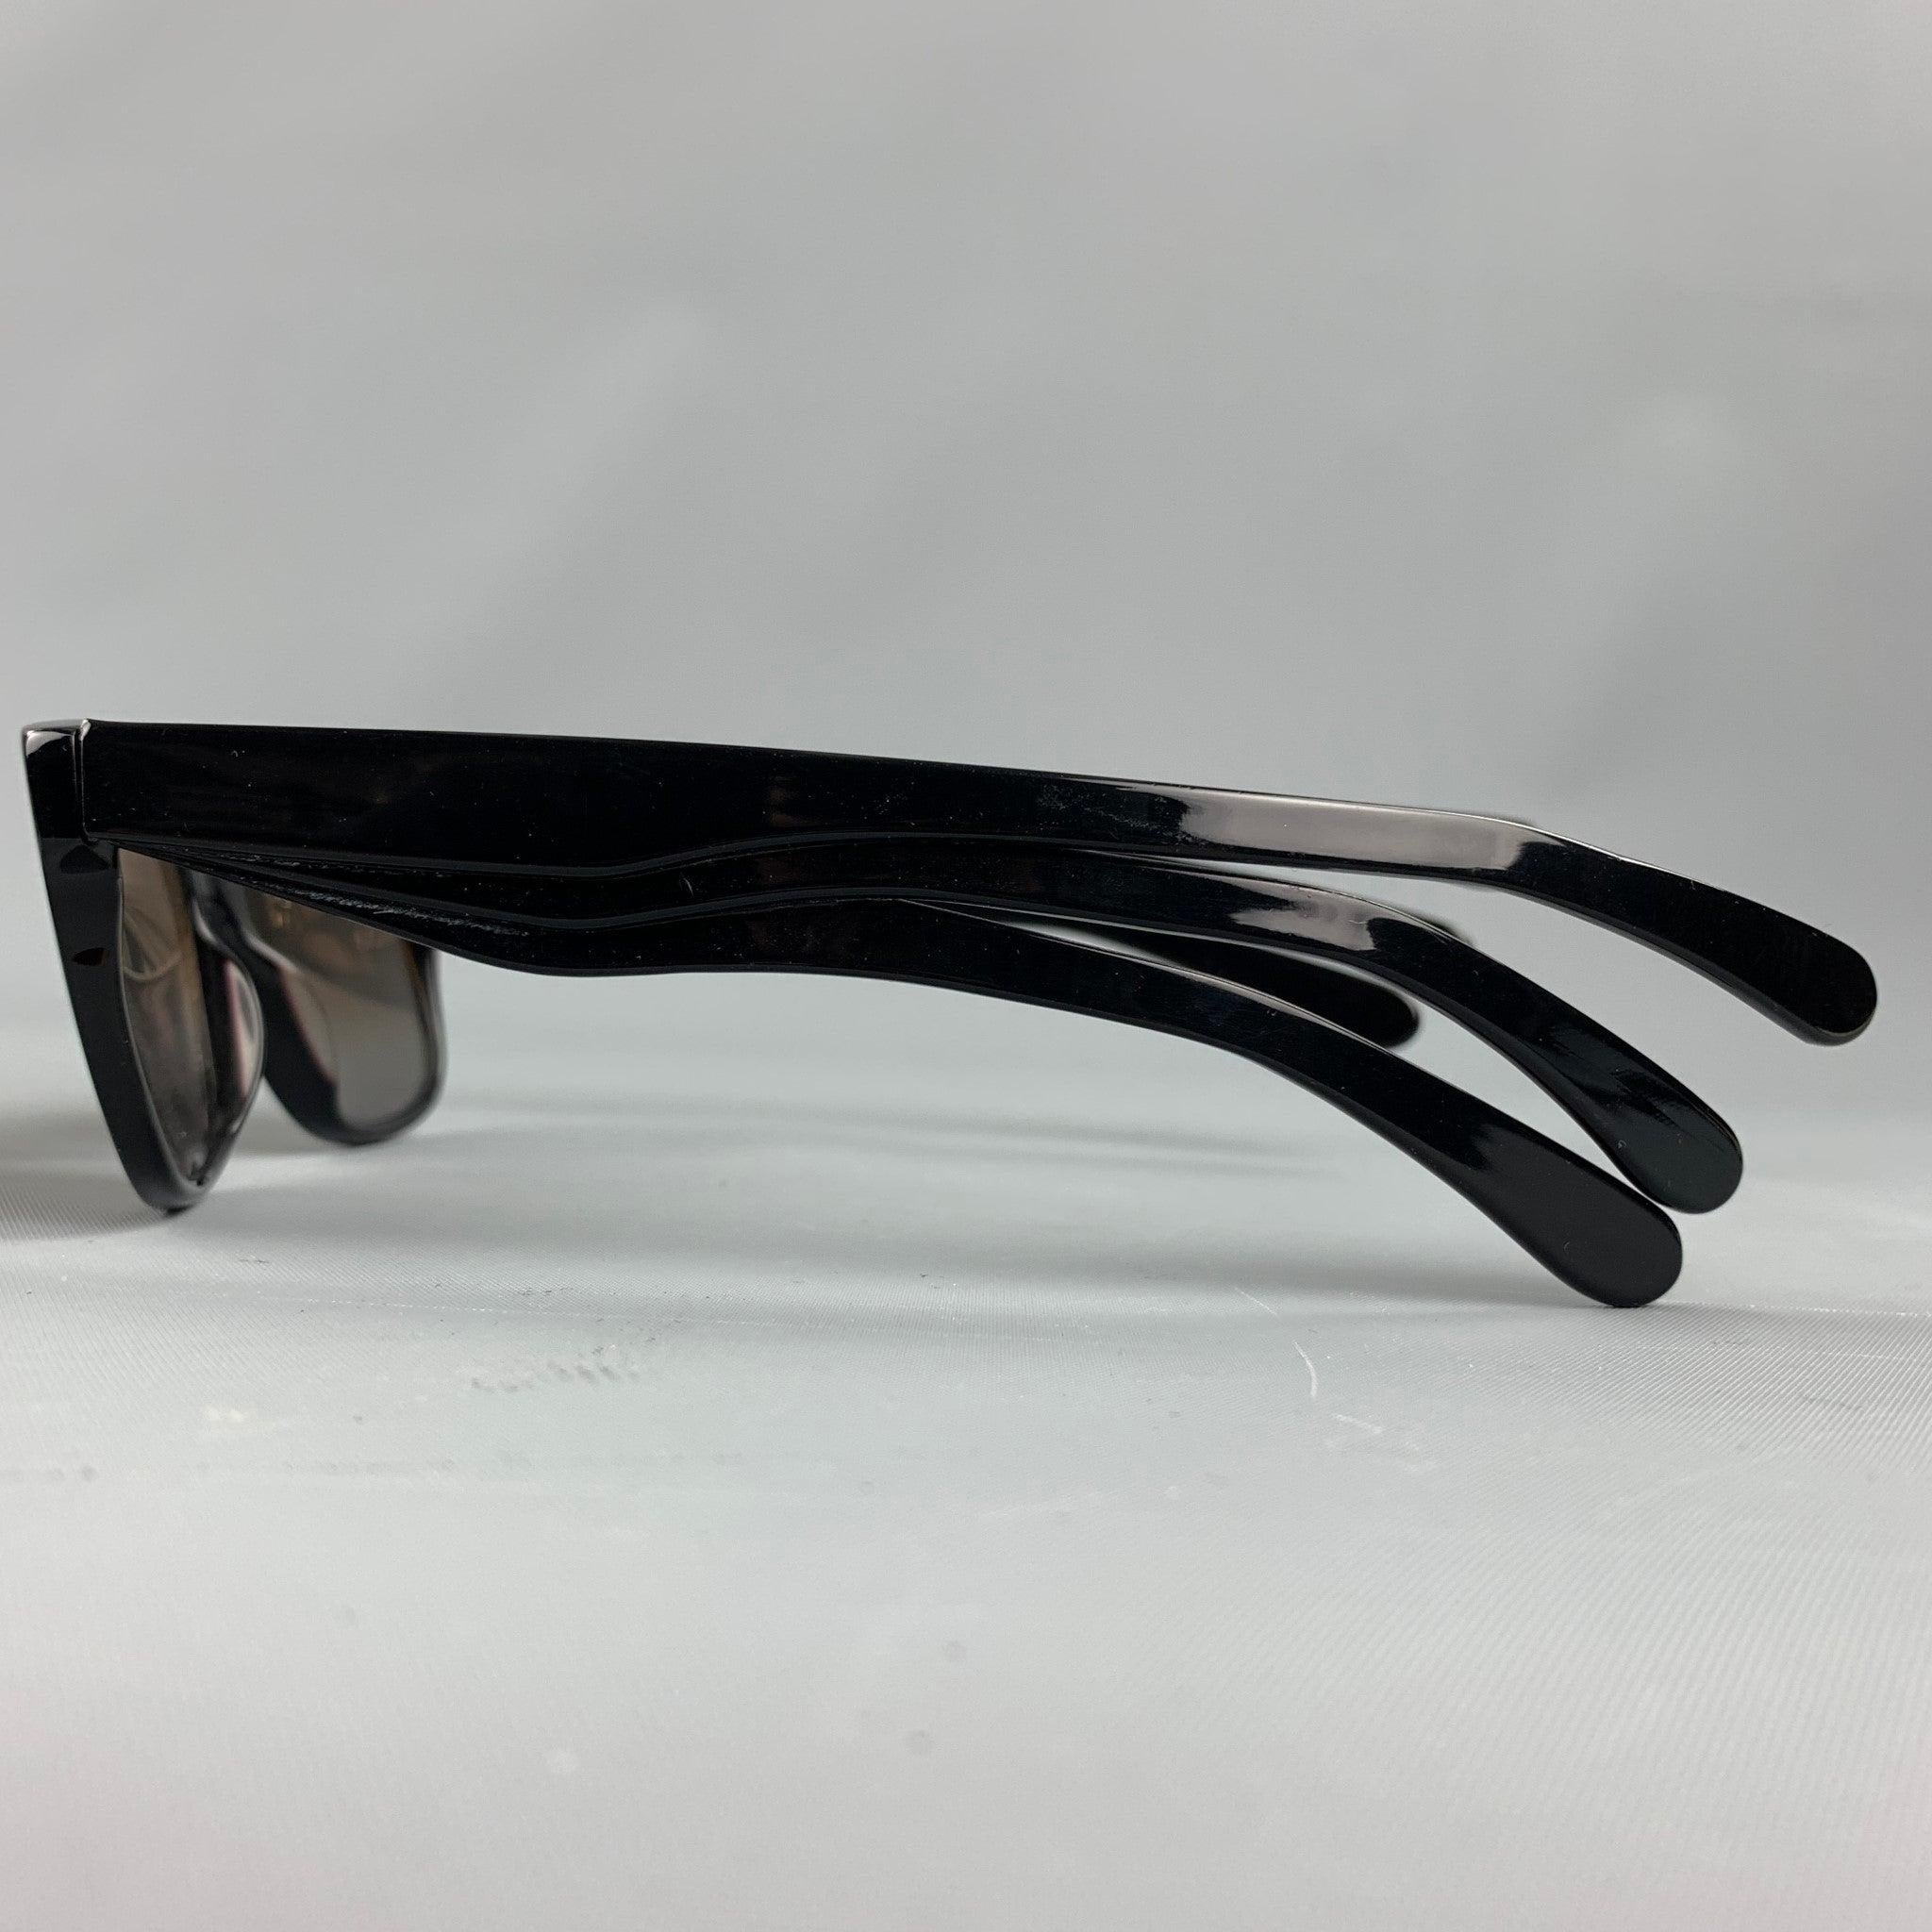 Vintage JEAN PAUL GAULTIER by MIKLI Black Acetate Sunglasses In Good Condition For Sale In San Francisco, CA